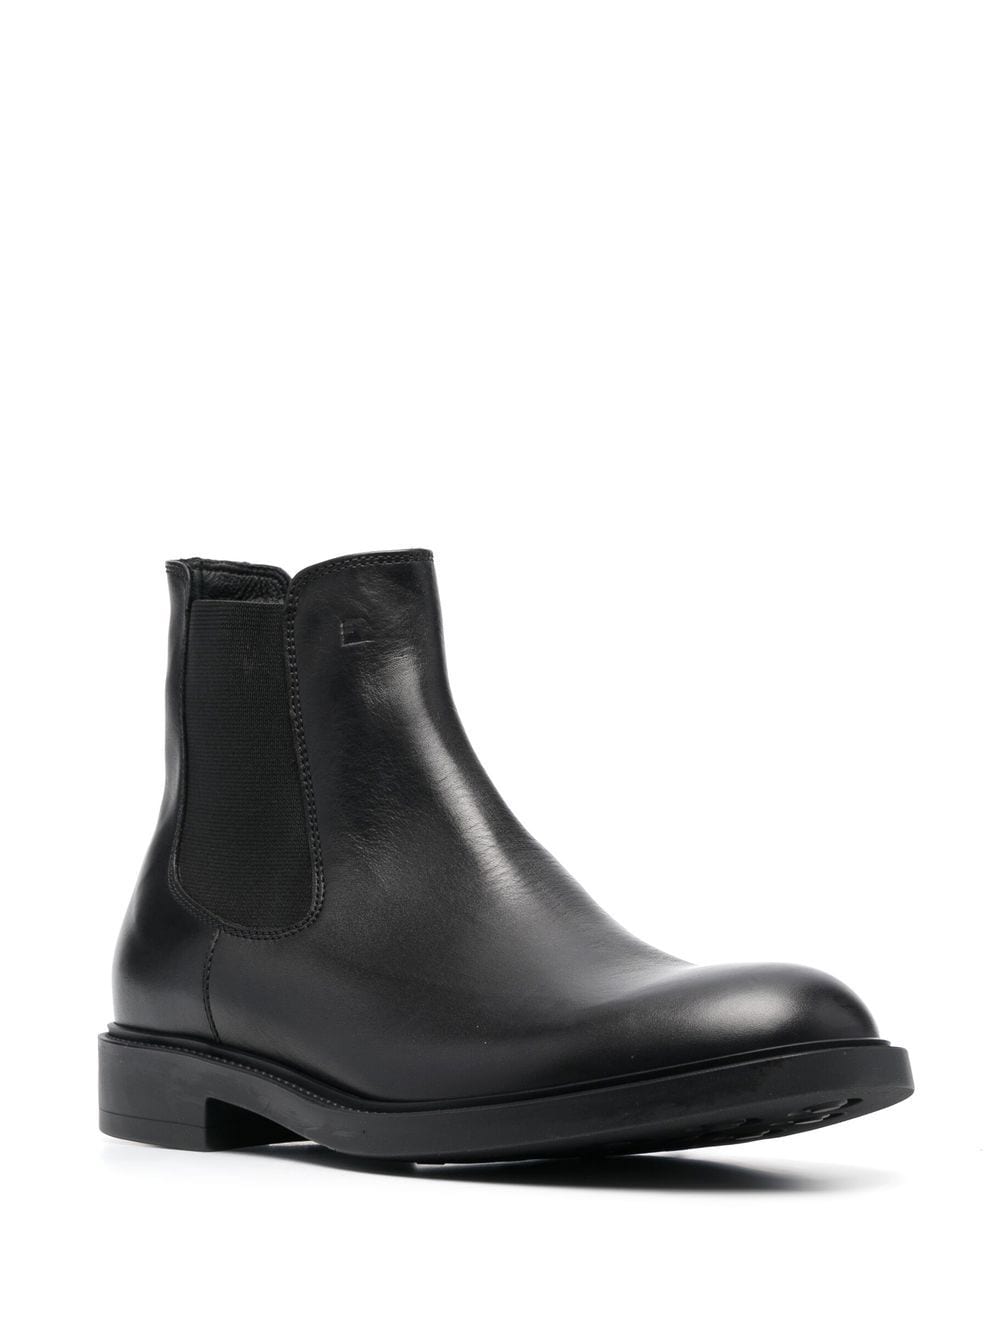 Image 2 of Fratelli Rossetti side-panel Chelsea boots